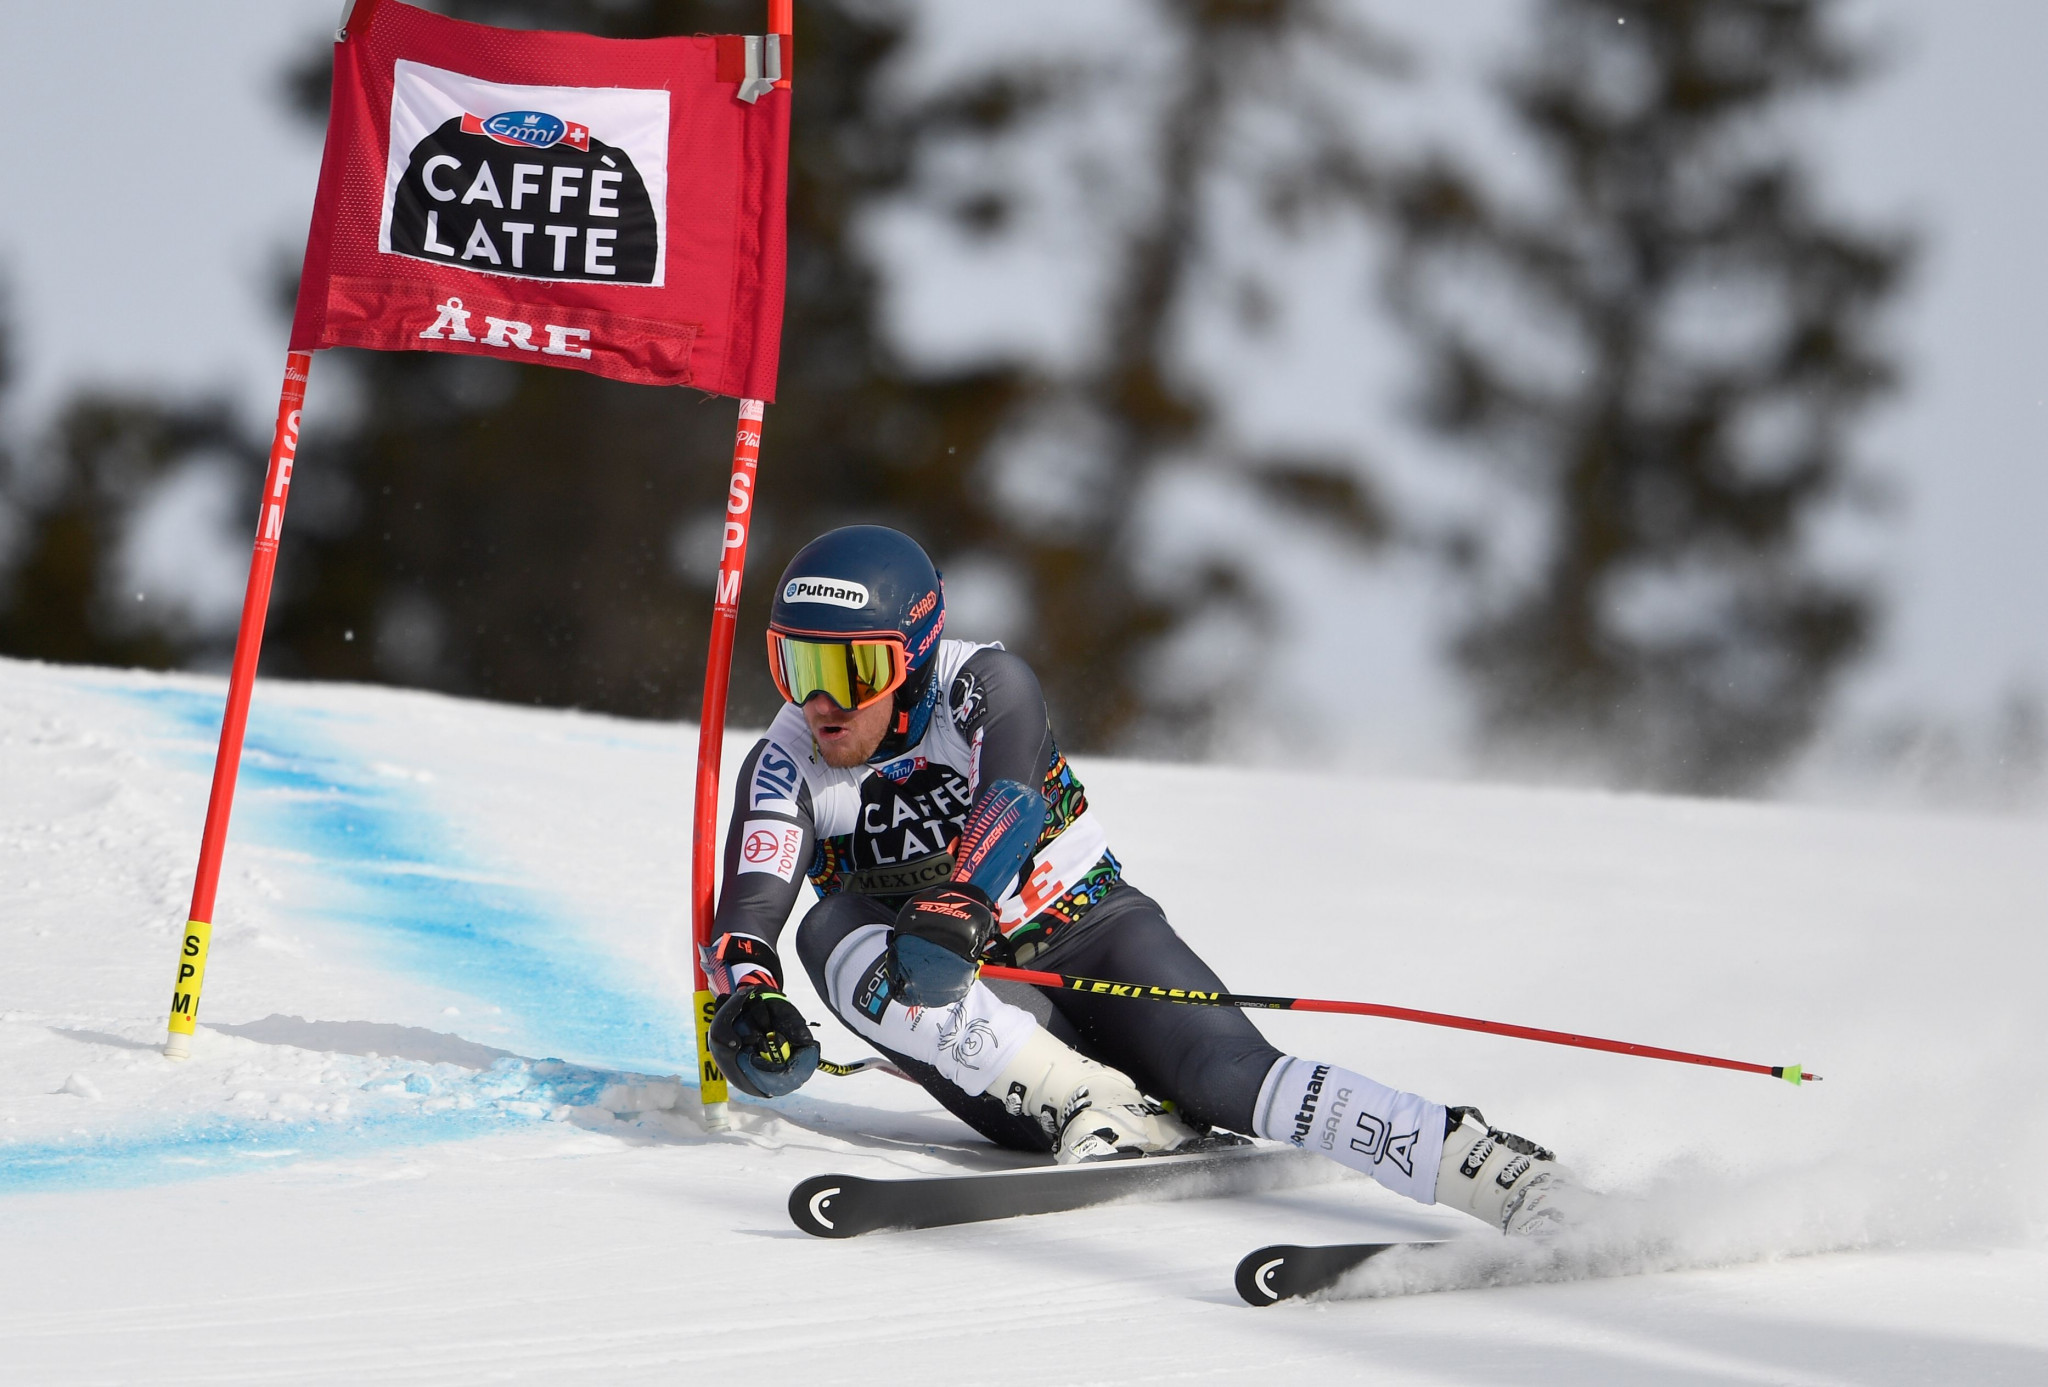 United States Ski and Snowboard hope they can bring stars like Ted Ligety to the Championships ©Getty Images